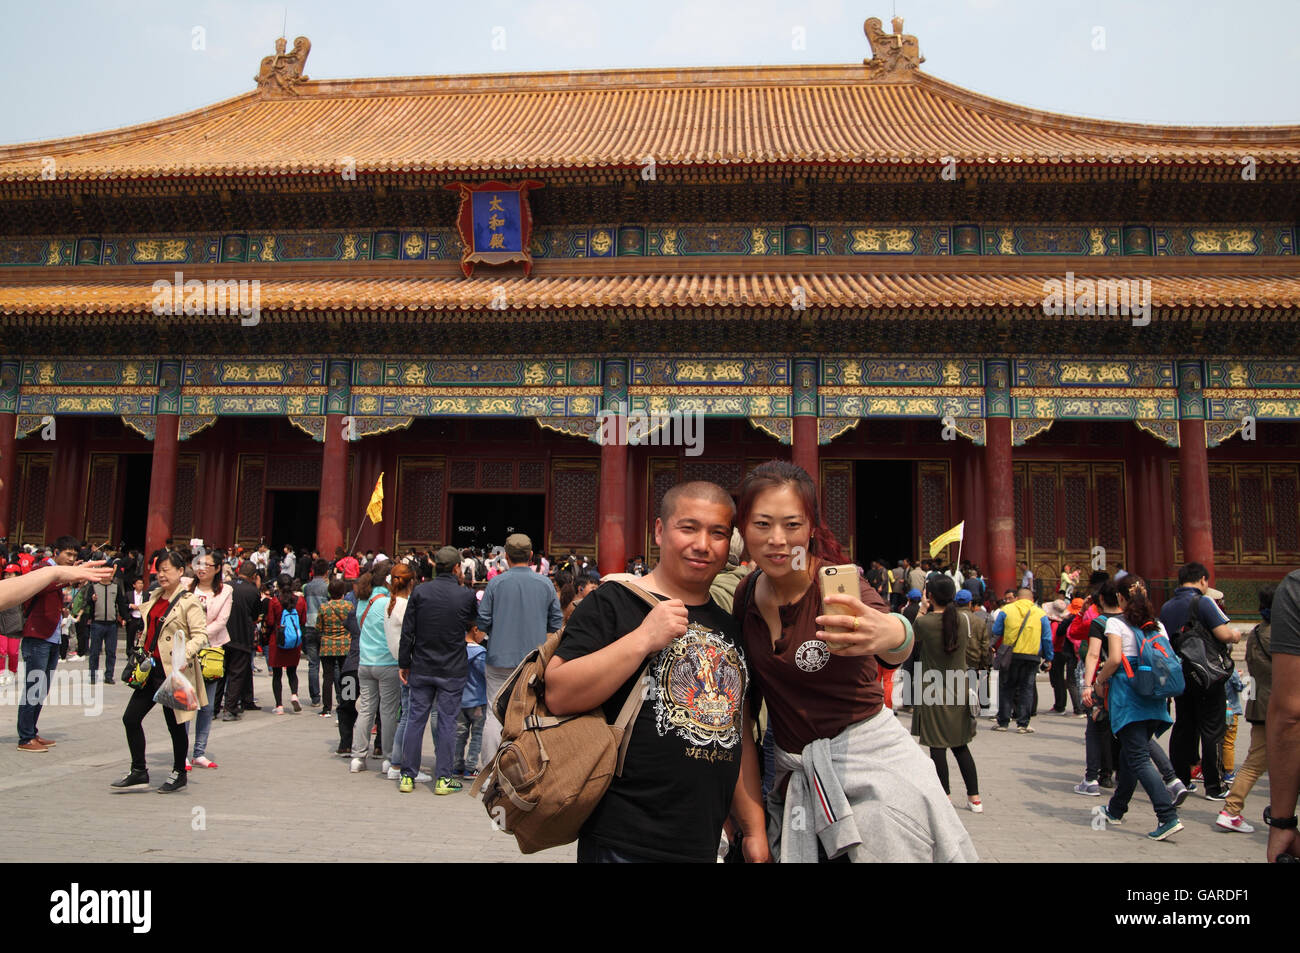 Woman uses a smartphone to take a selfie of her and her man in front of the Hall of Supreme Harmony, many tourists are around. Stock Photo